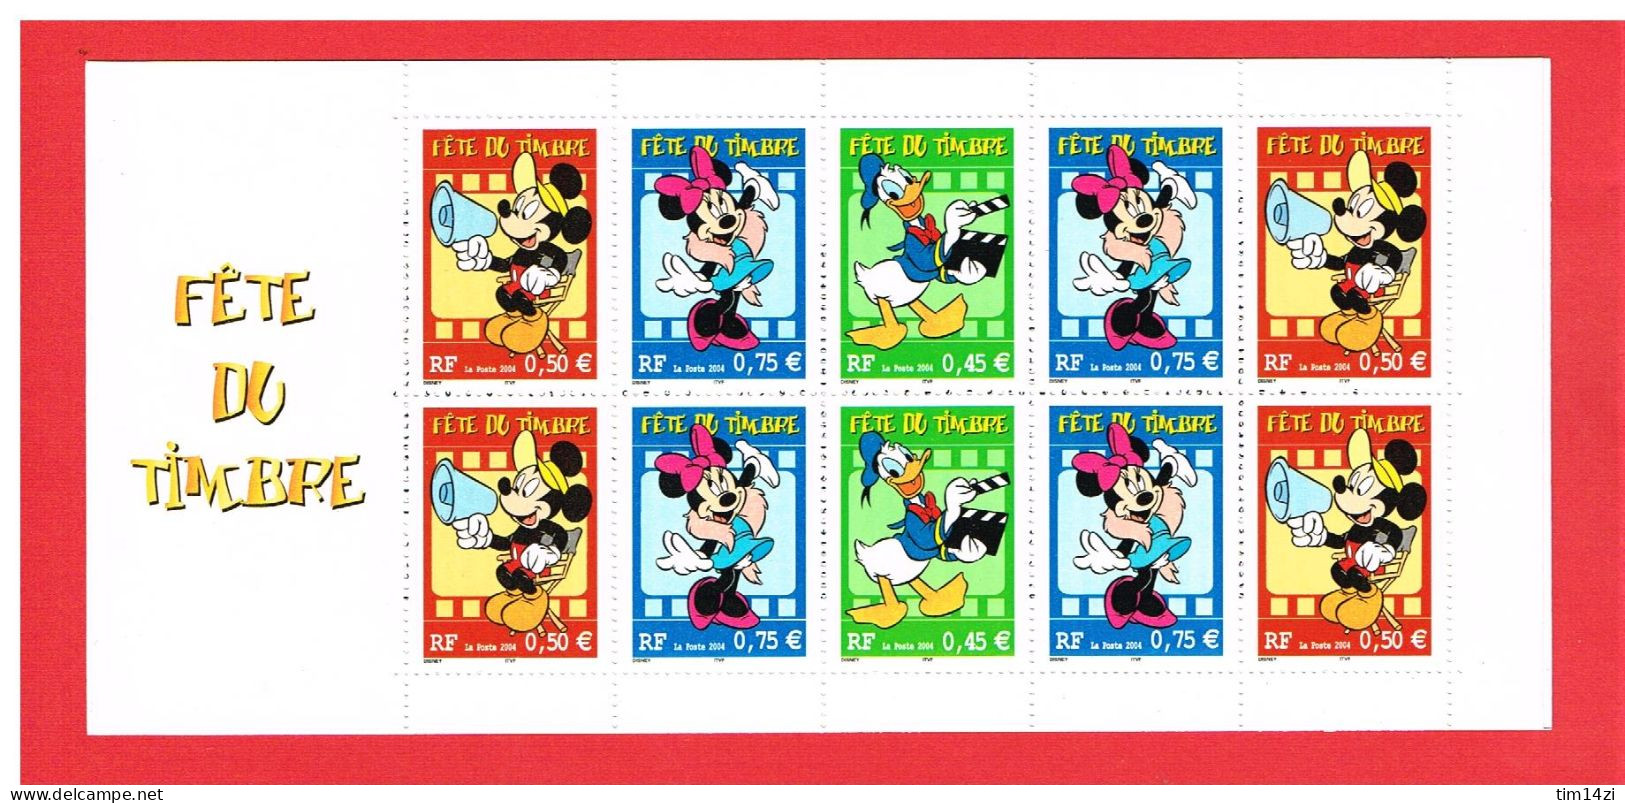 FRANCE 2004 - CARNET FETE DU TIMBRE - BC 3641a - NEUF** - DISNEY -  Y.&.T - Cote : 25.00 € - Stamp Day